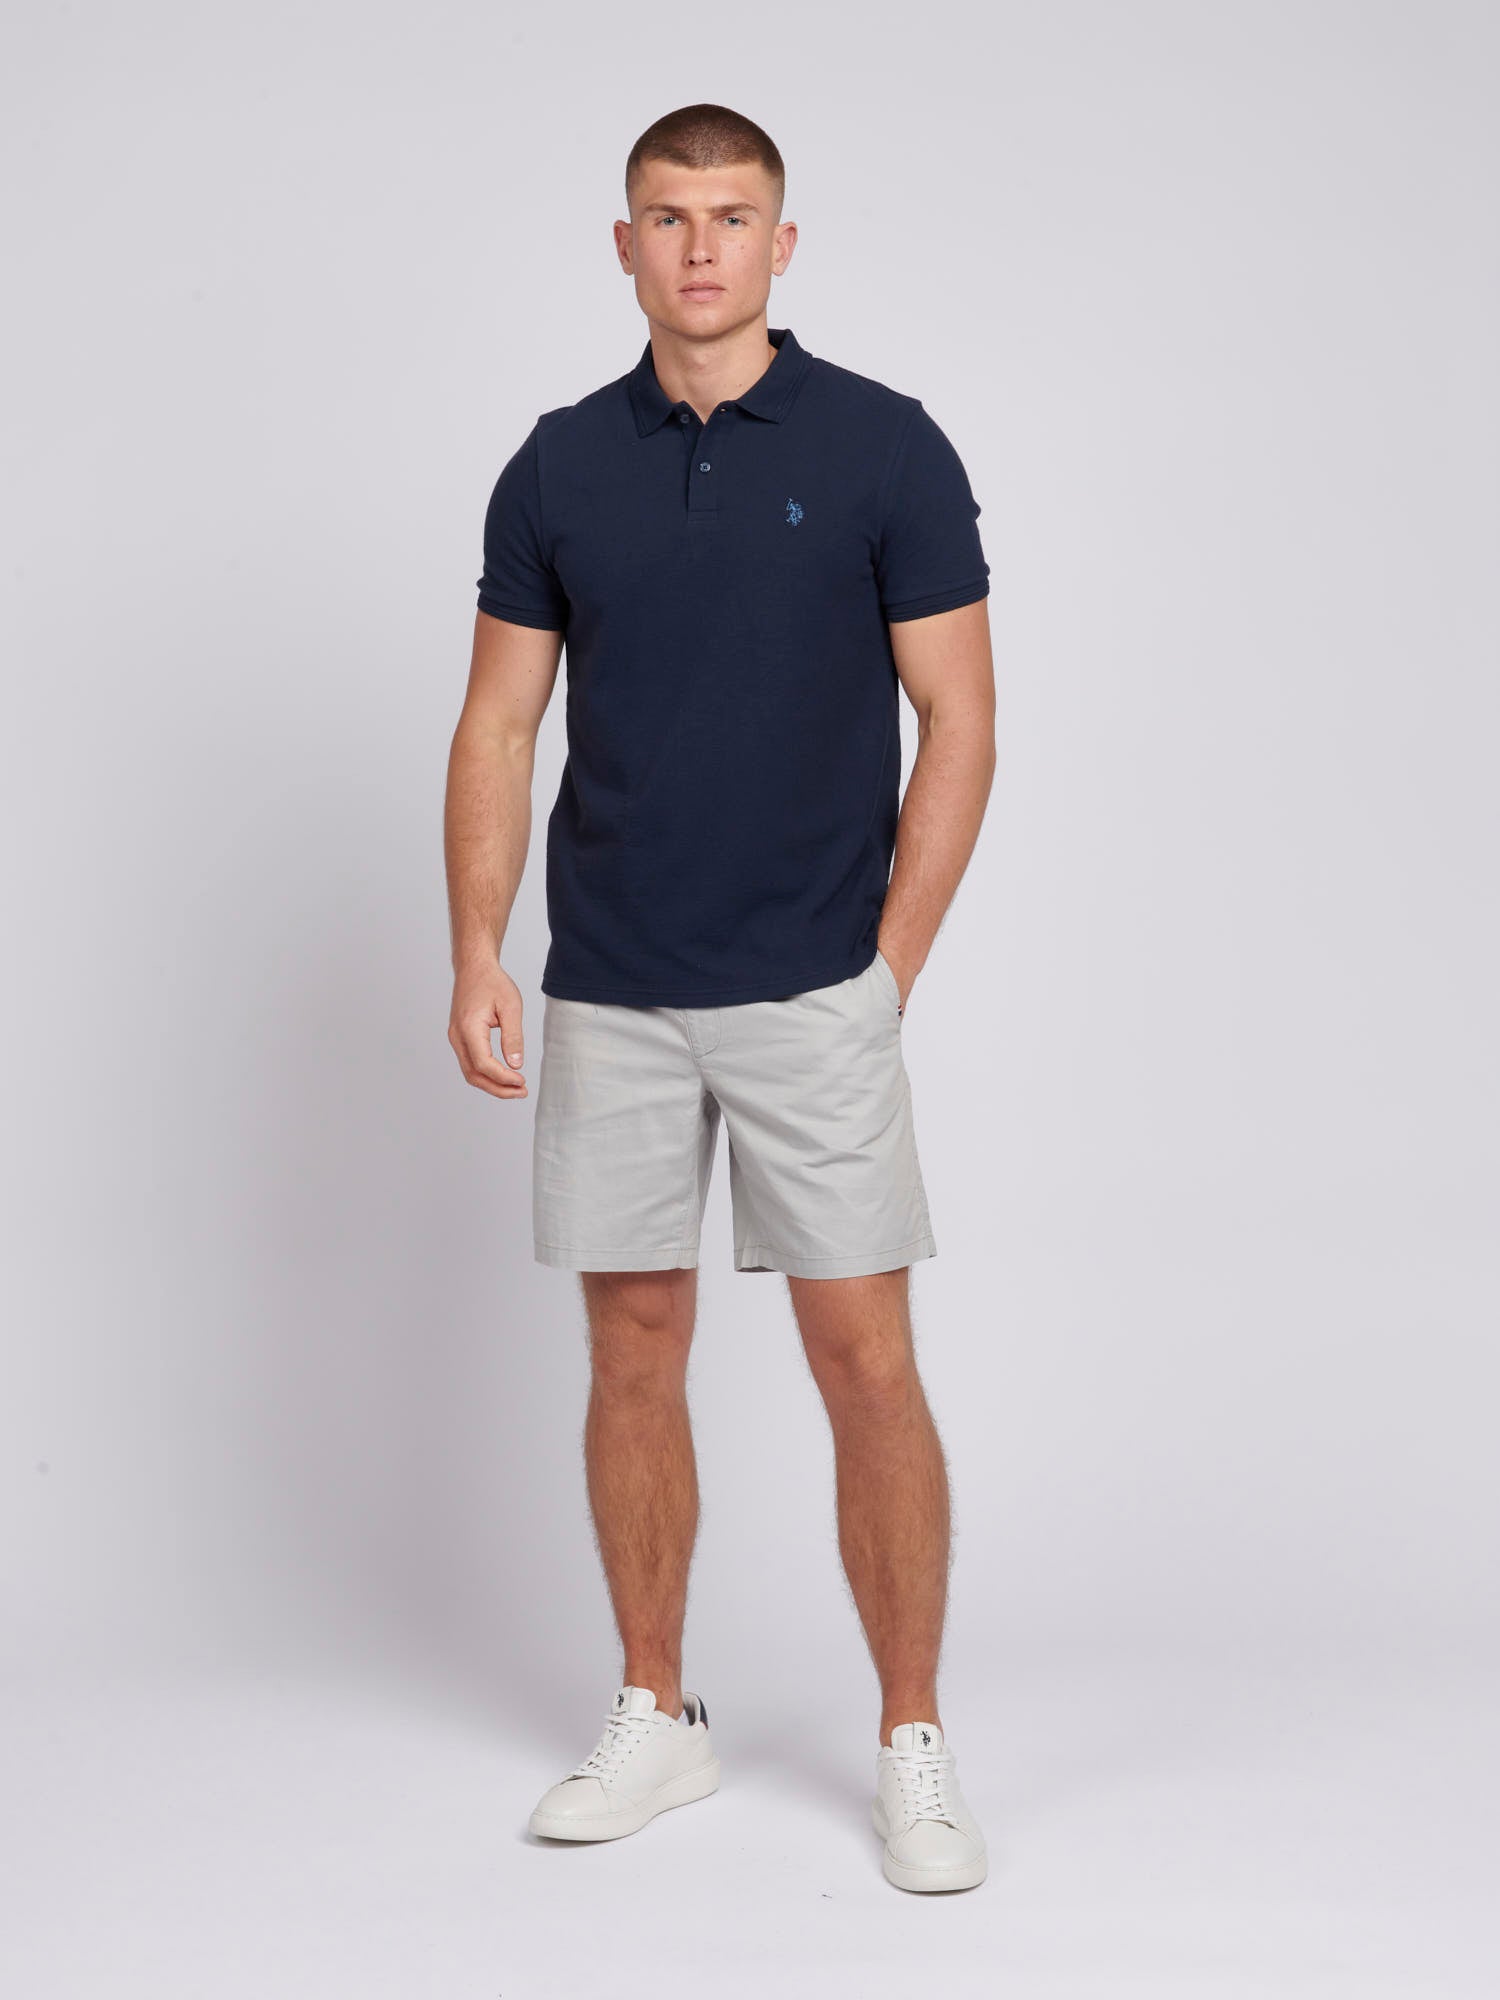 Mens Textured Terry Polo Shirt in Dark Sapphire Navy / Moonlight Blue DHM